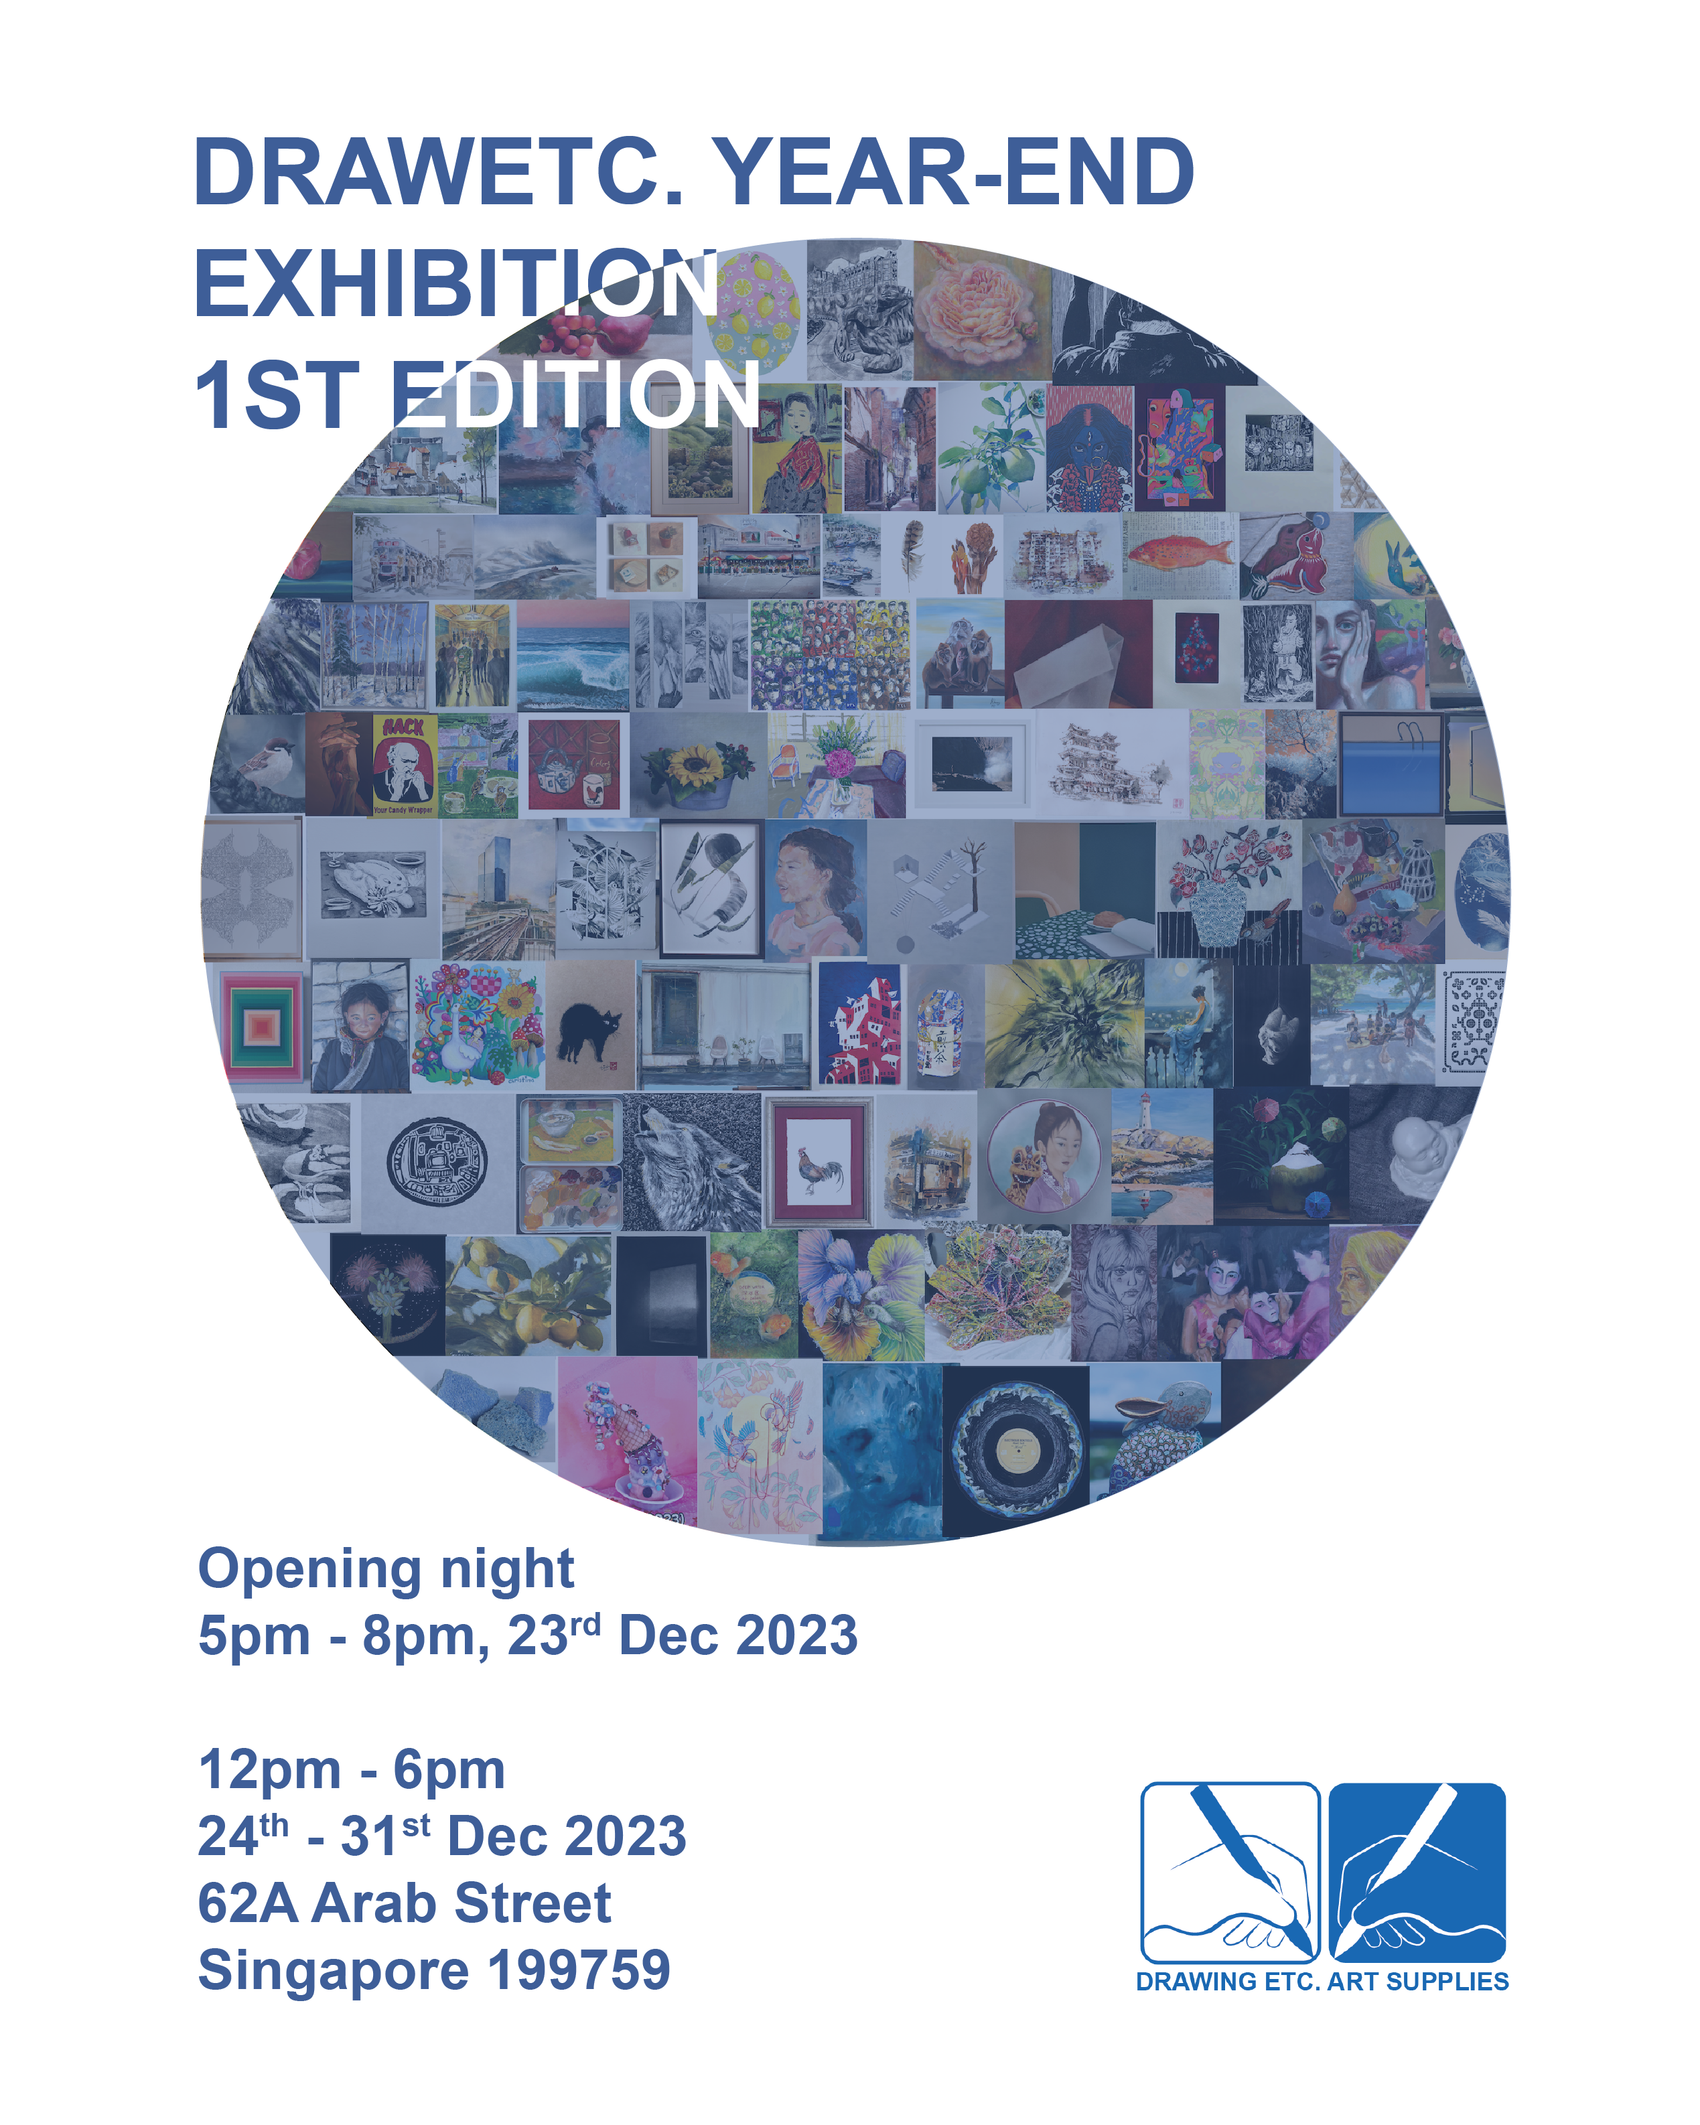 Drawing Etc. Year-End Exhibition 1st Edition